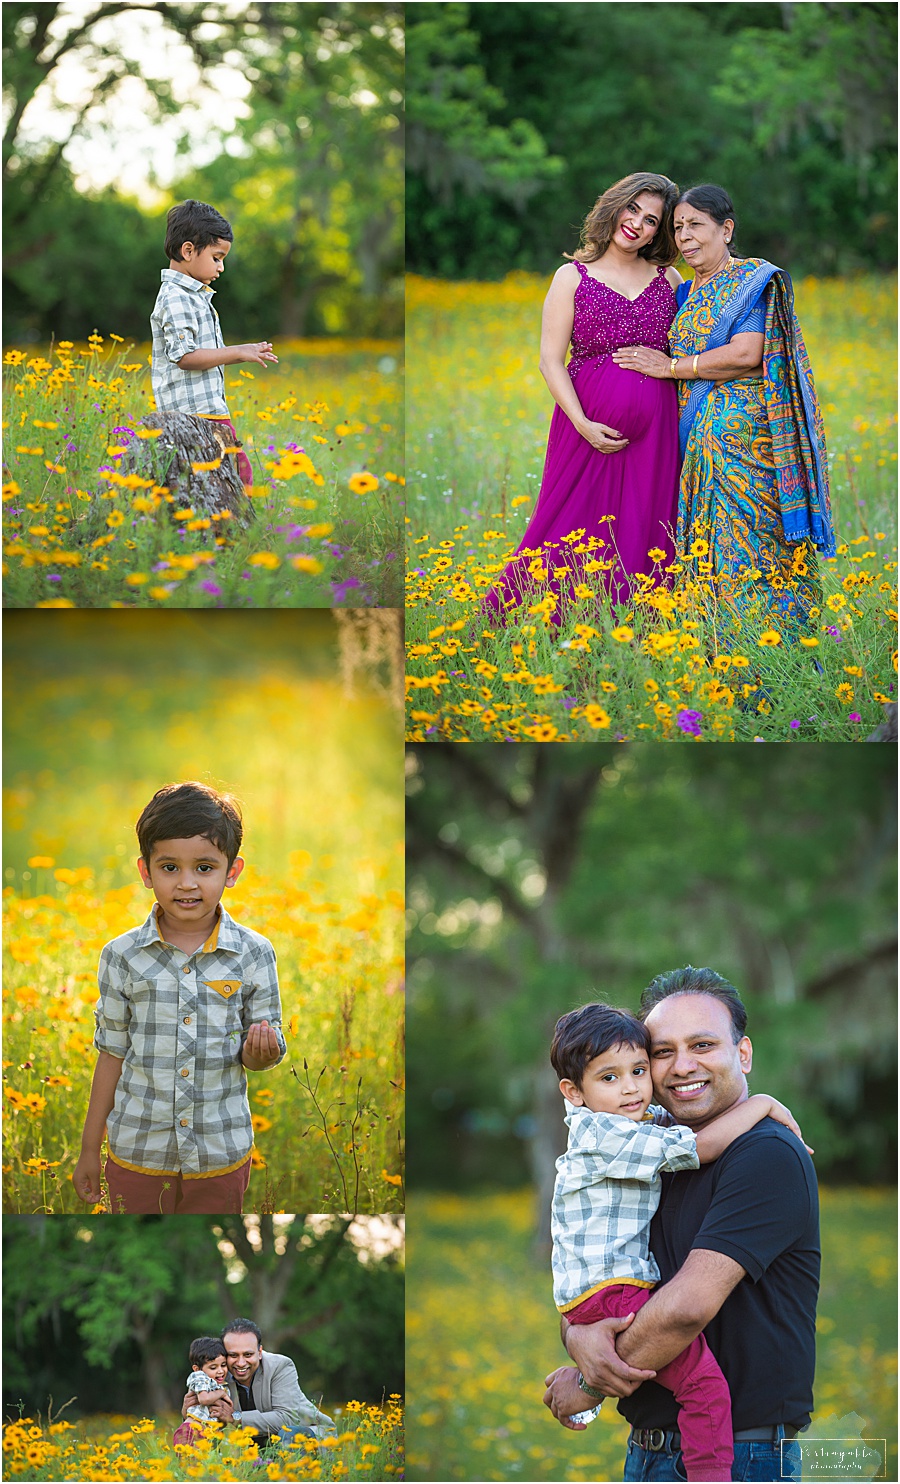 Orlando-maternity-session-in-flowers